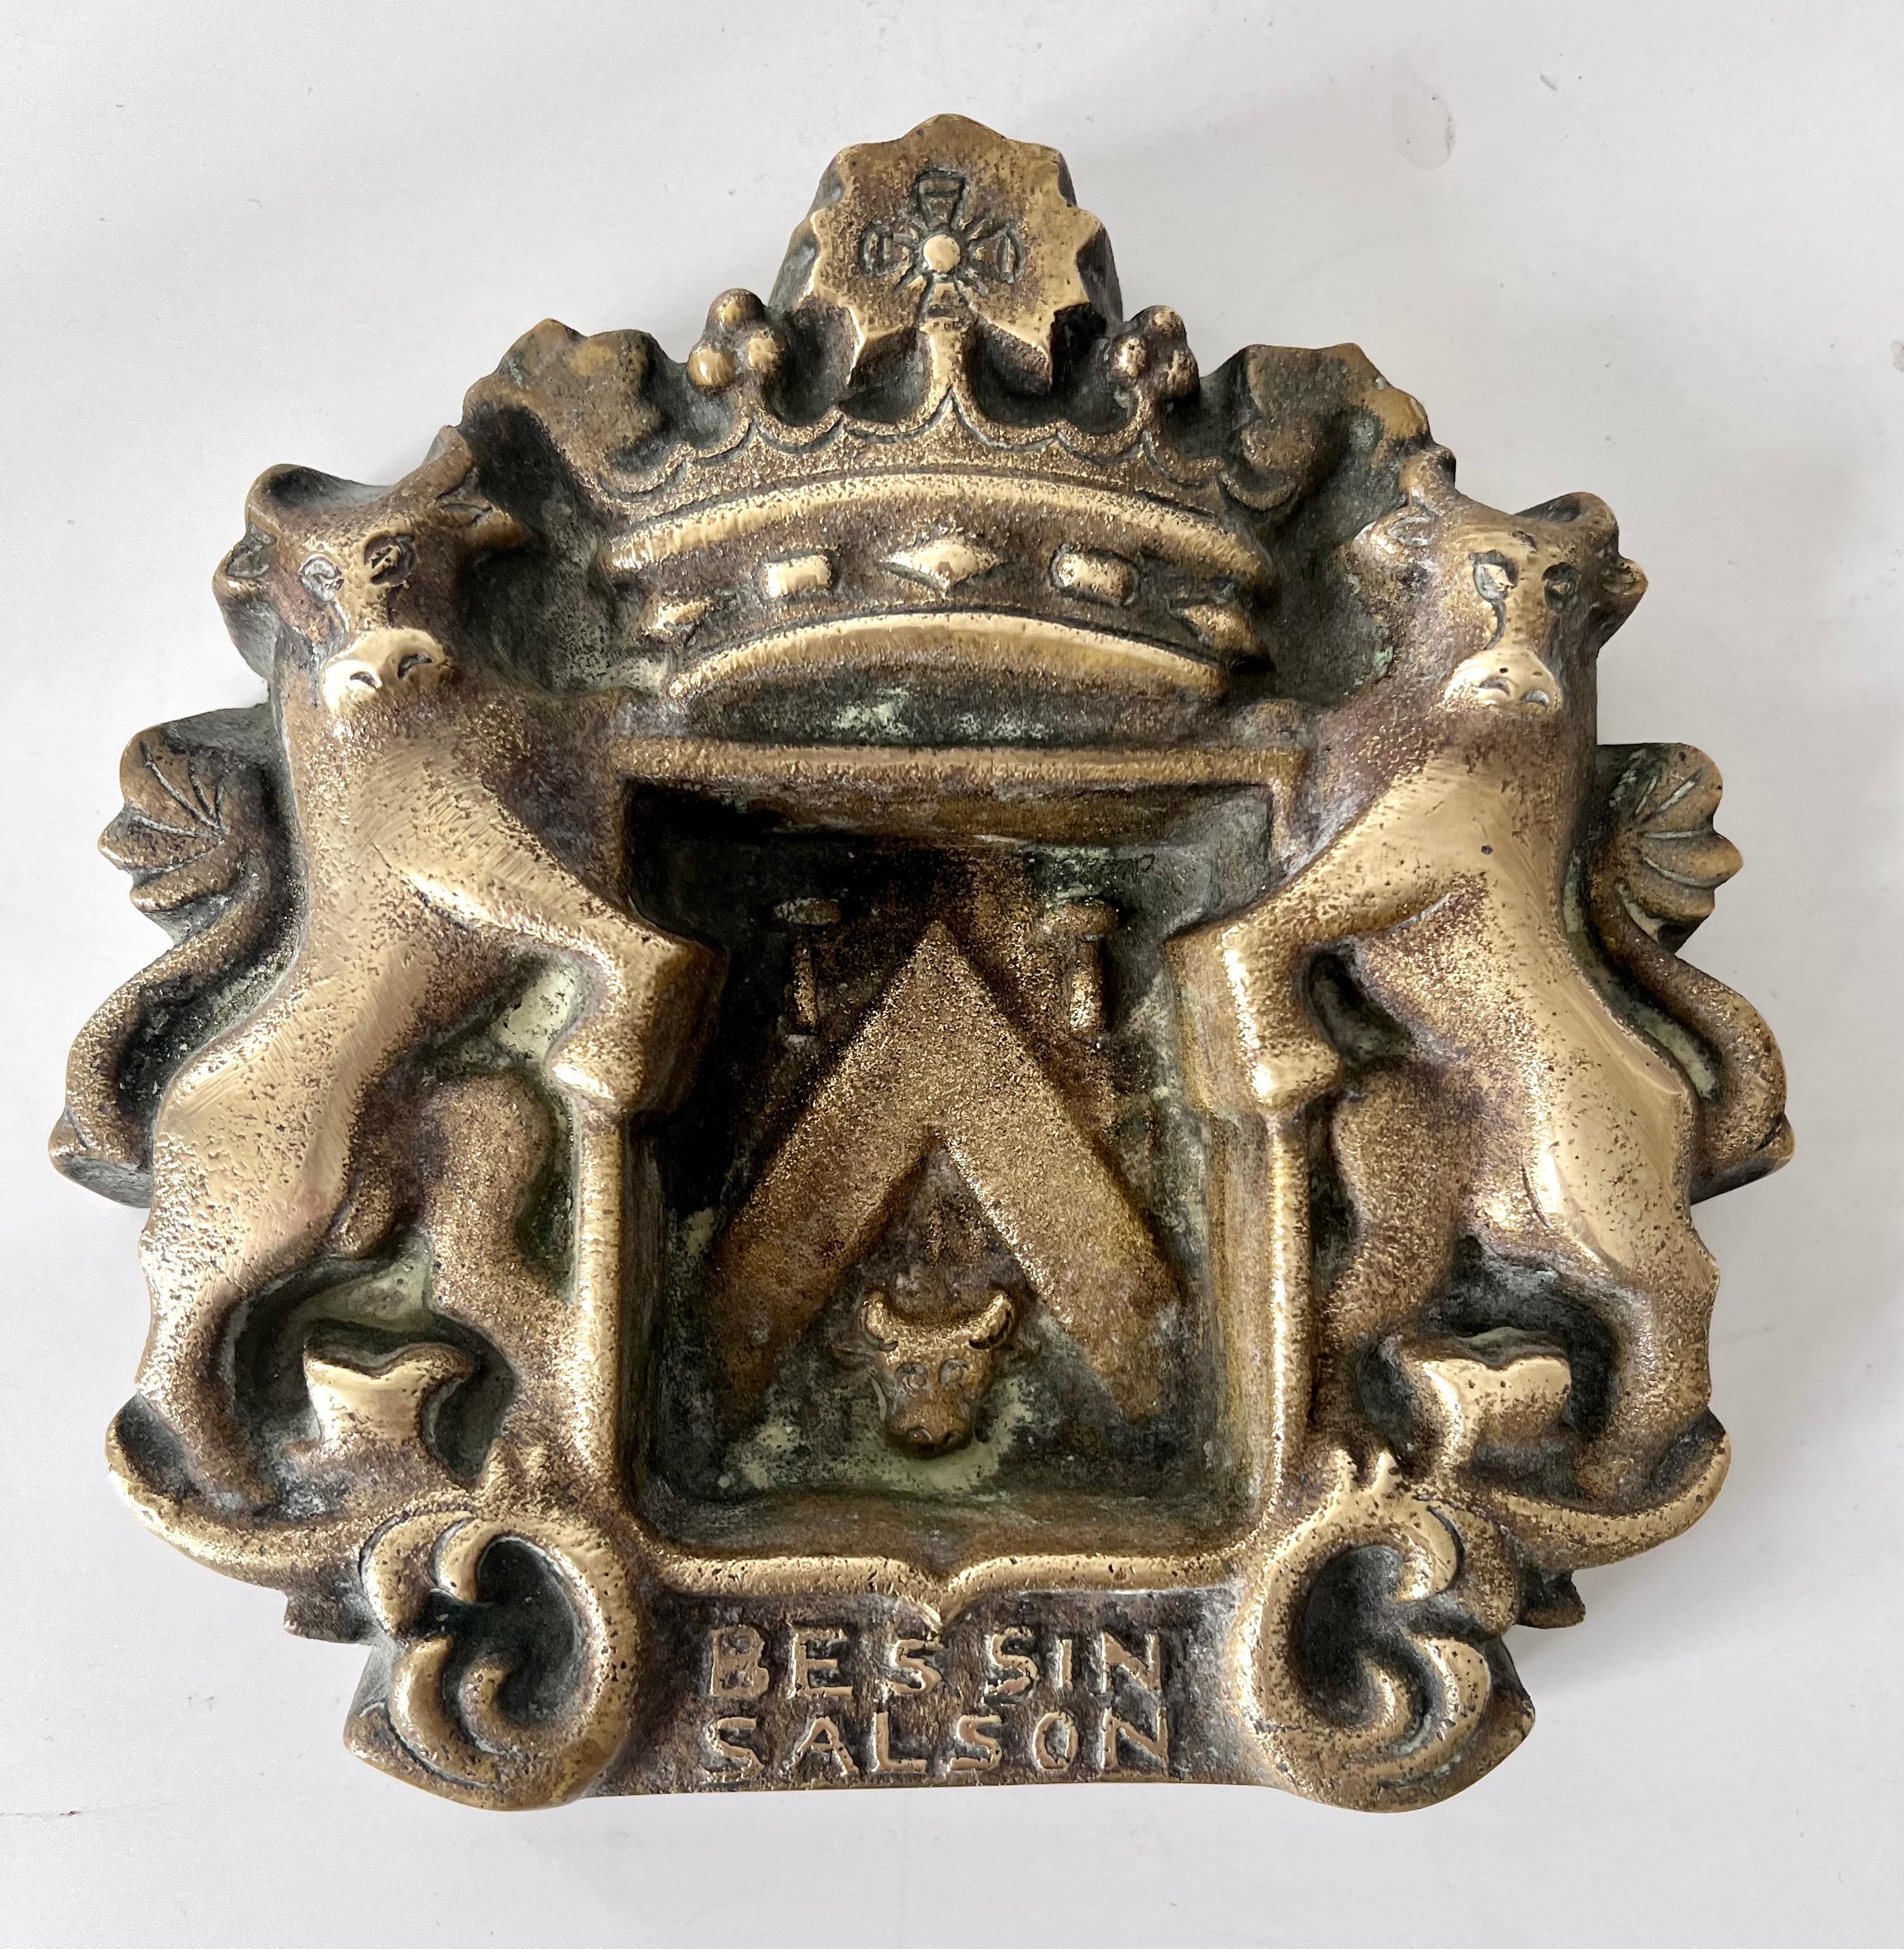 Acquired in Paris France, a solid brass ashtray or catch all that has a Coat of Arms or Crest with Two Cows and a Crown. A compliment to any bar or cocktail area. Works with things like 420 to desktop items.